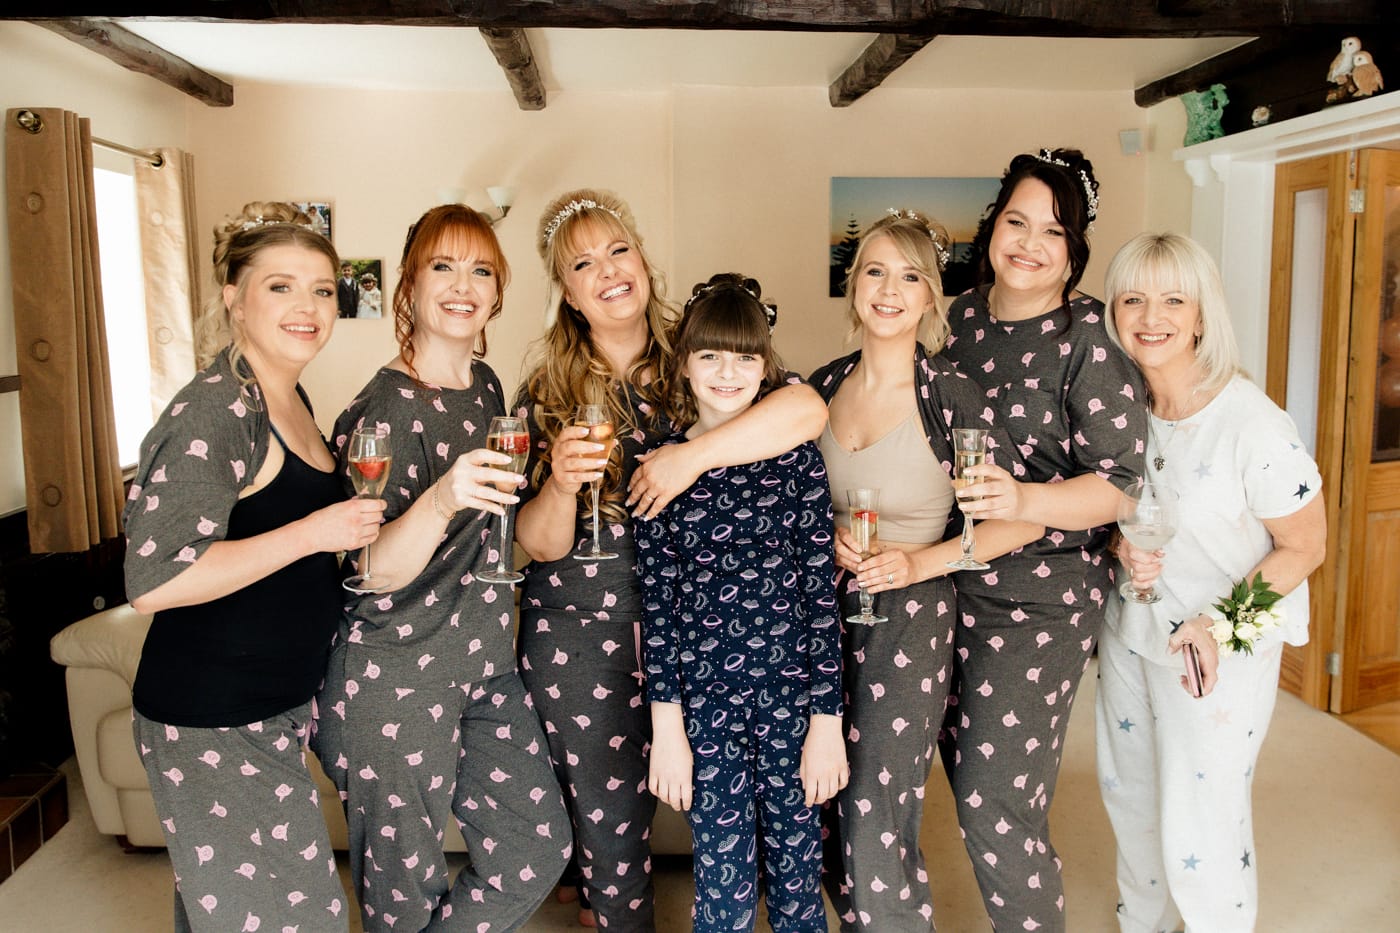 bridal party at their worsley home where bride was getting ready for her wedding day